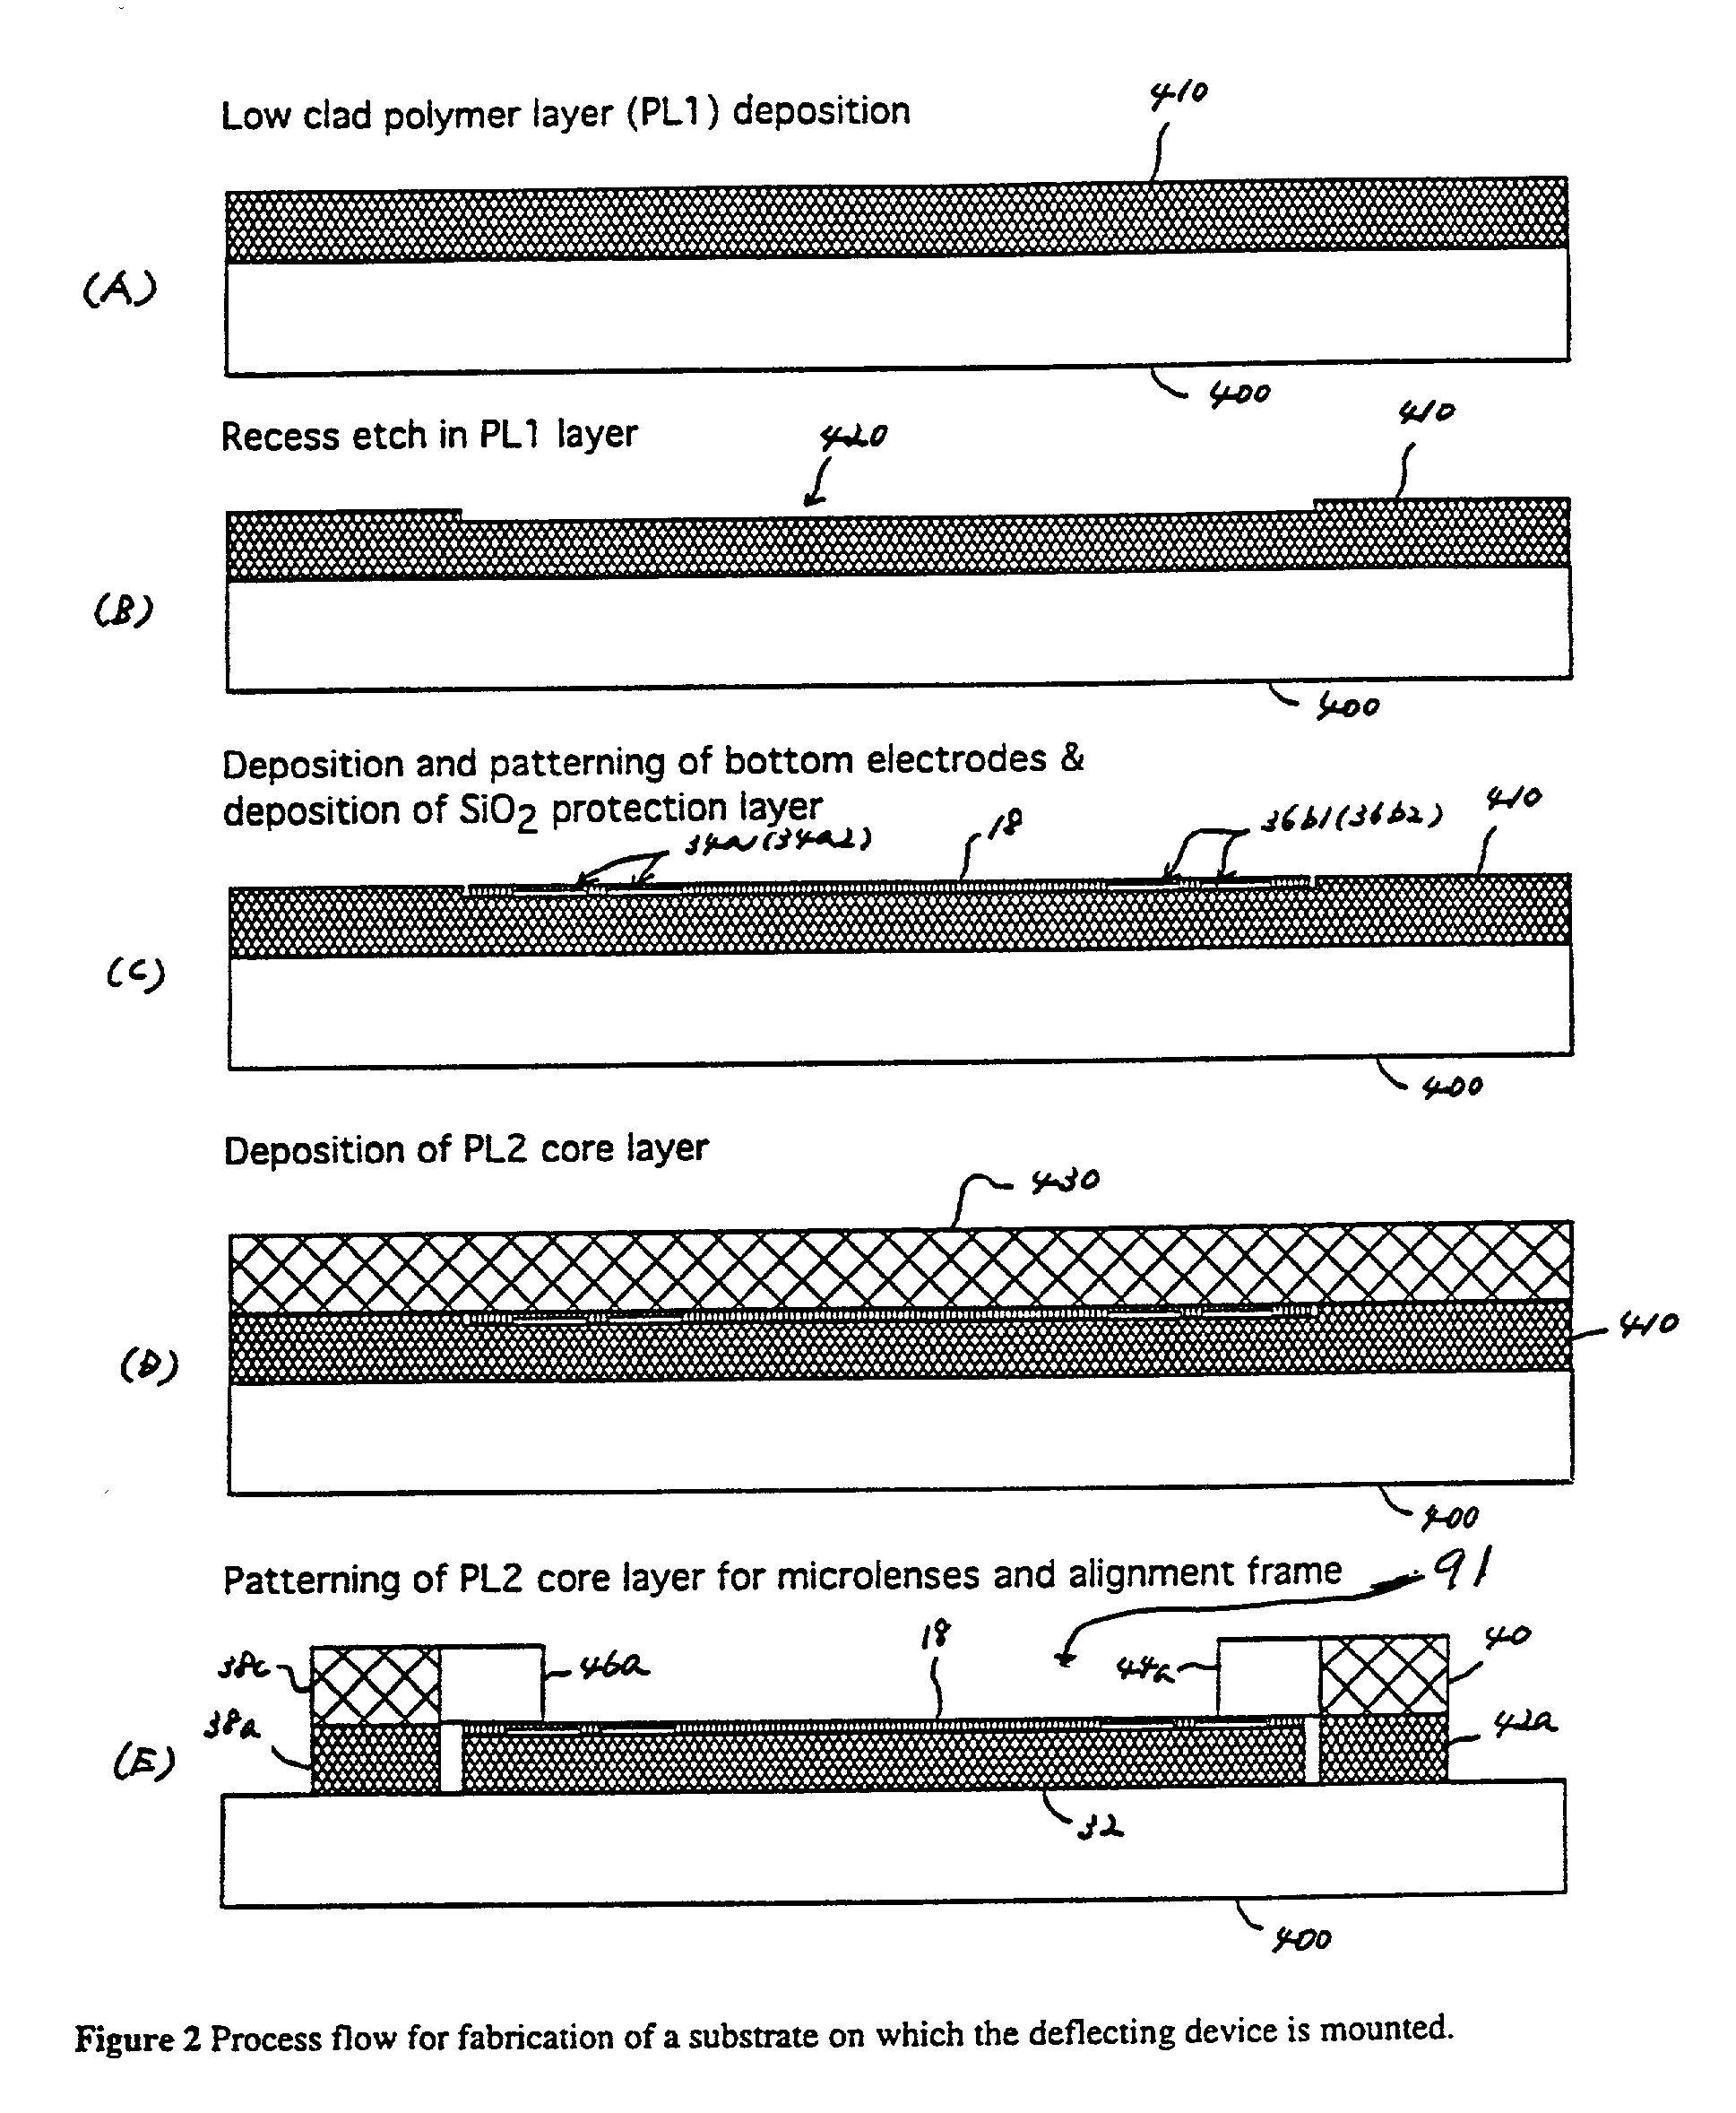 Optical switching apparatus and method for fabricating